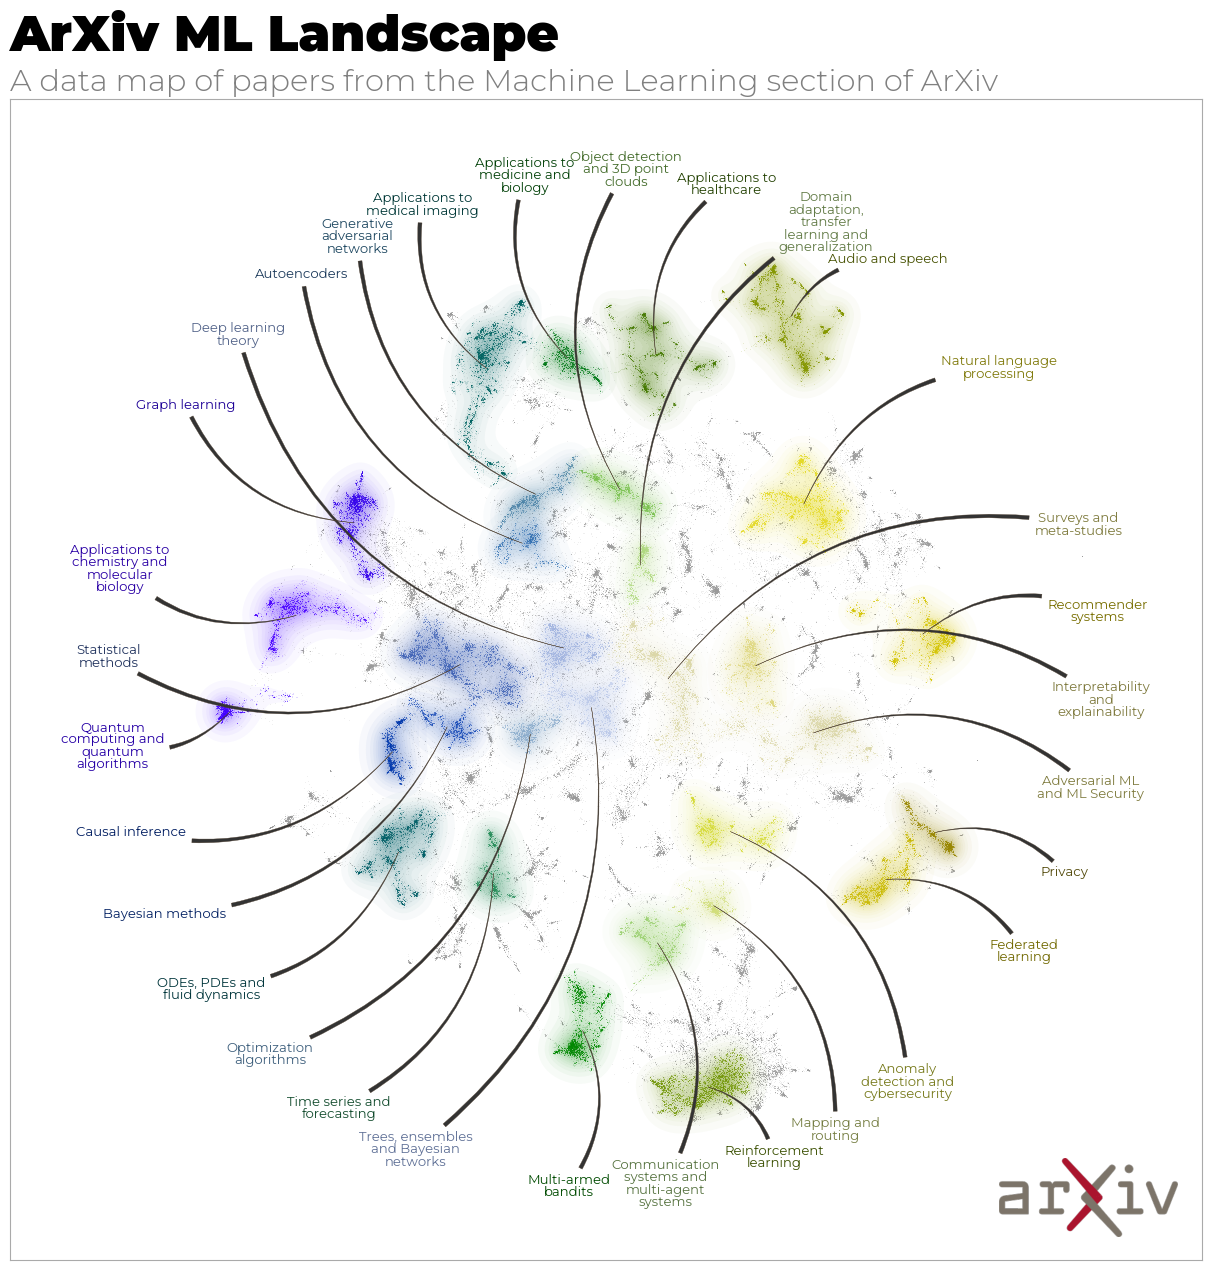 A styled data map plot of papers from ArXiv ML